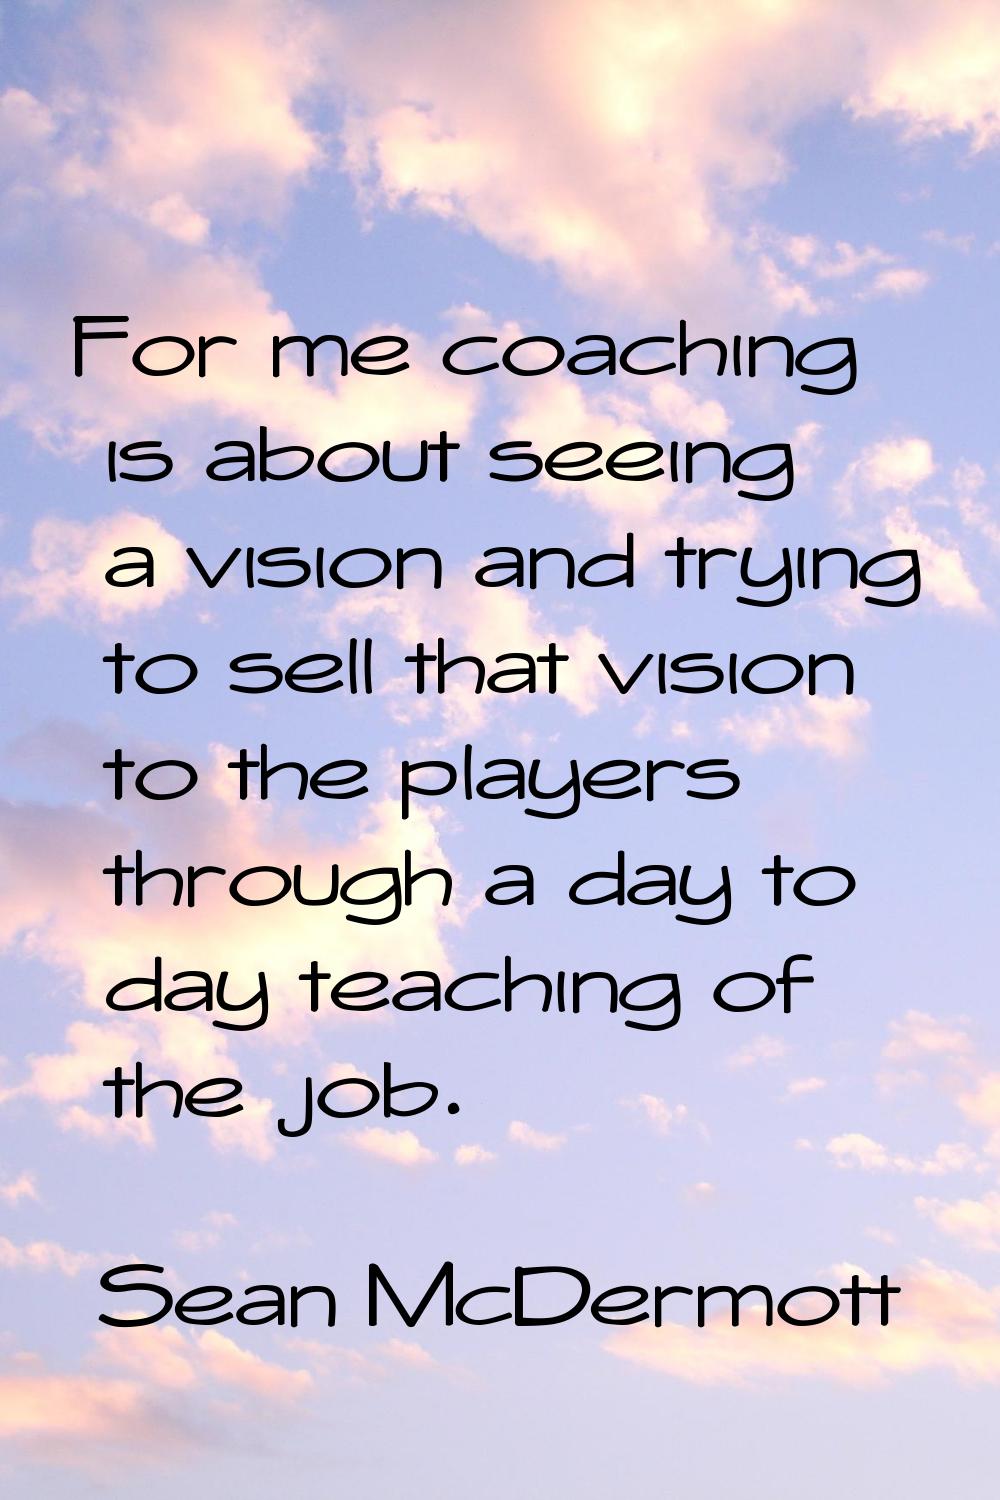 For me coaching is about seeing a vision and trying to sell that vision to the players through a da